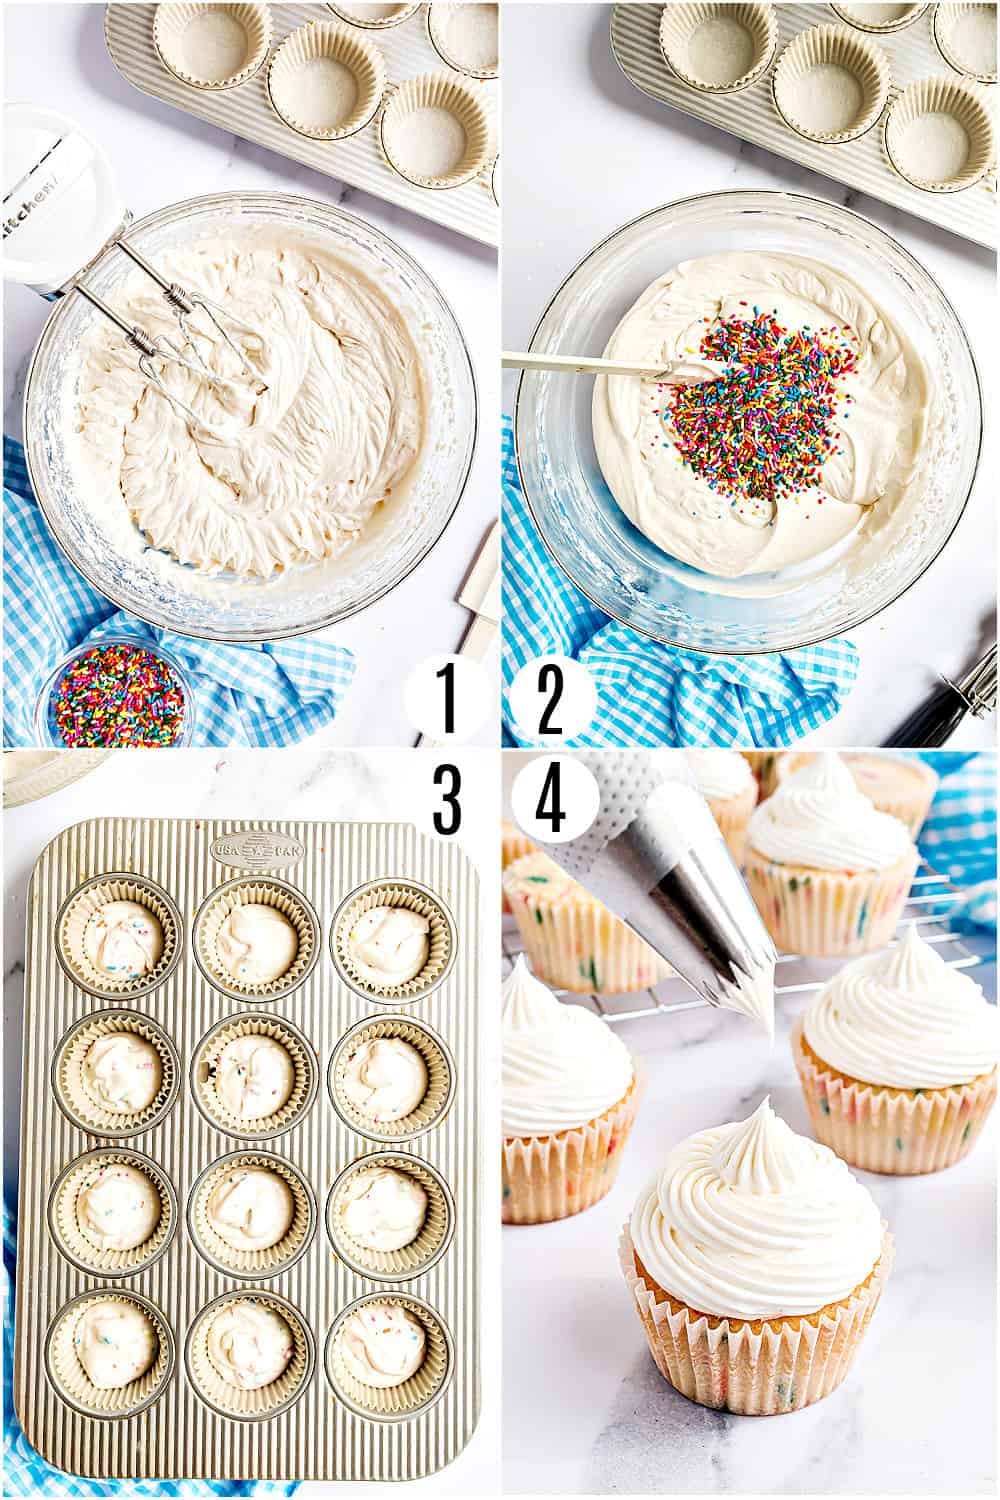 Step by step photos showing how to make funfetti cupcakes